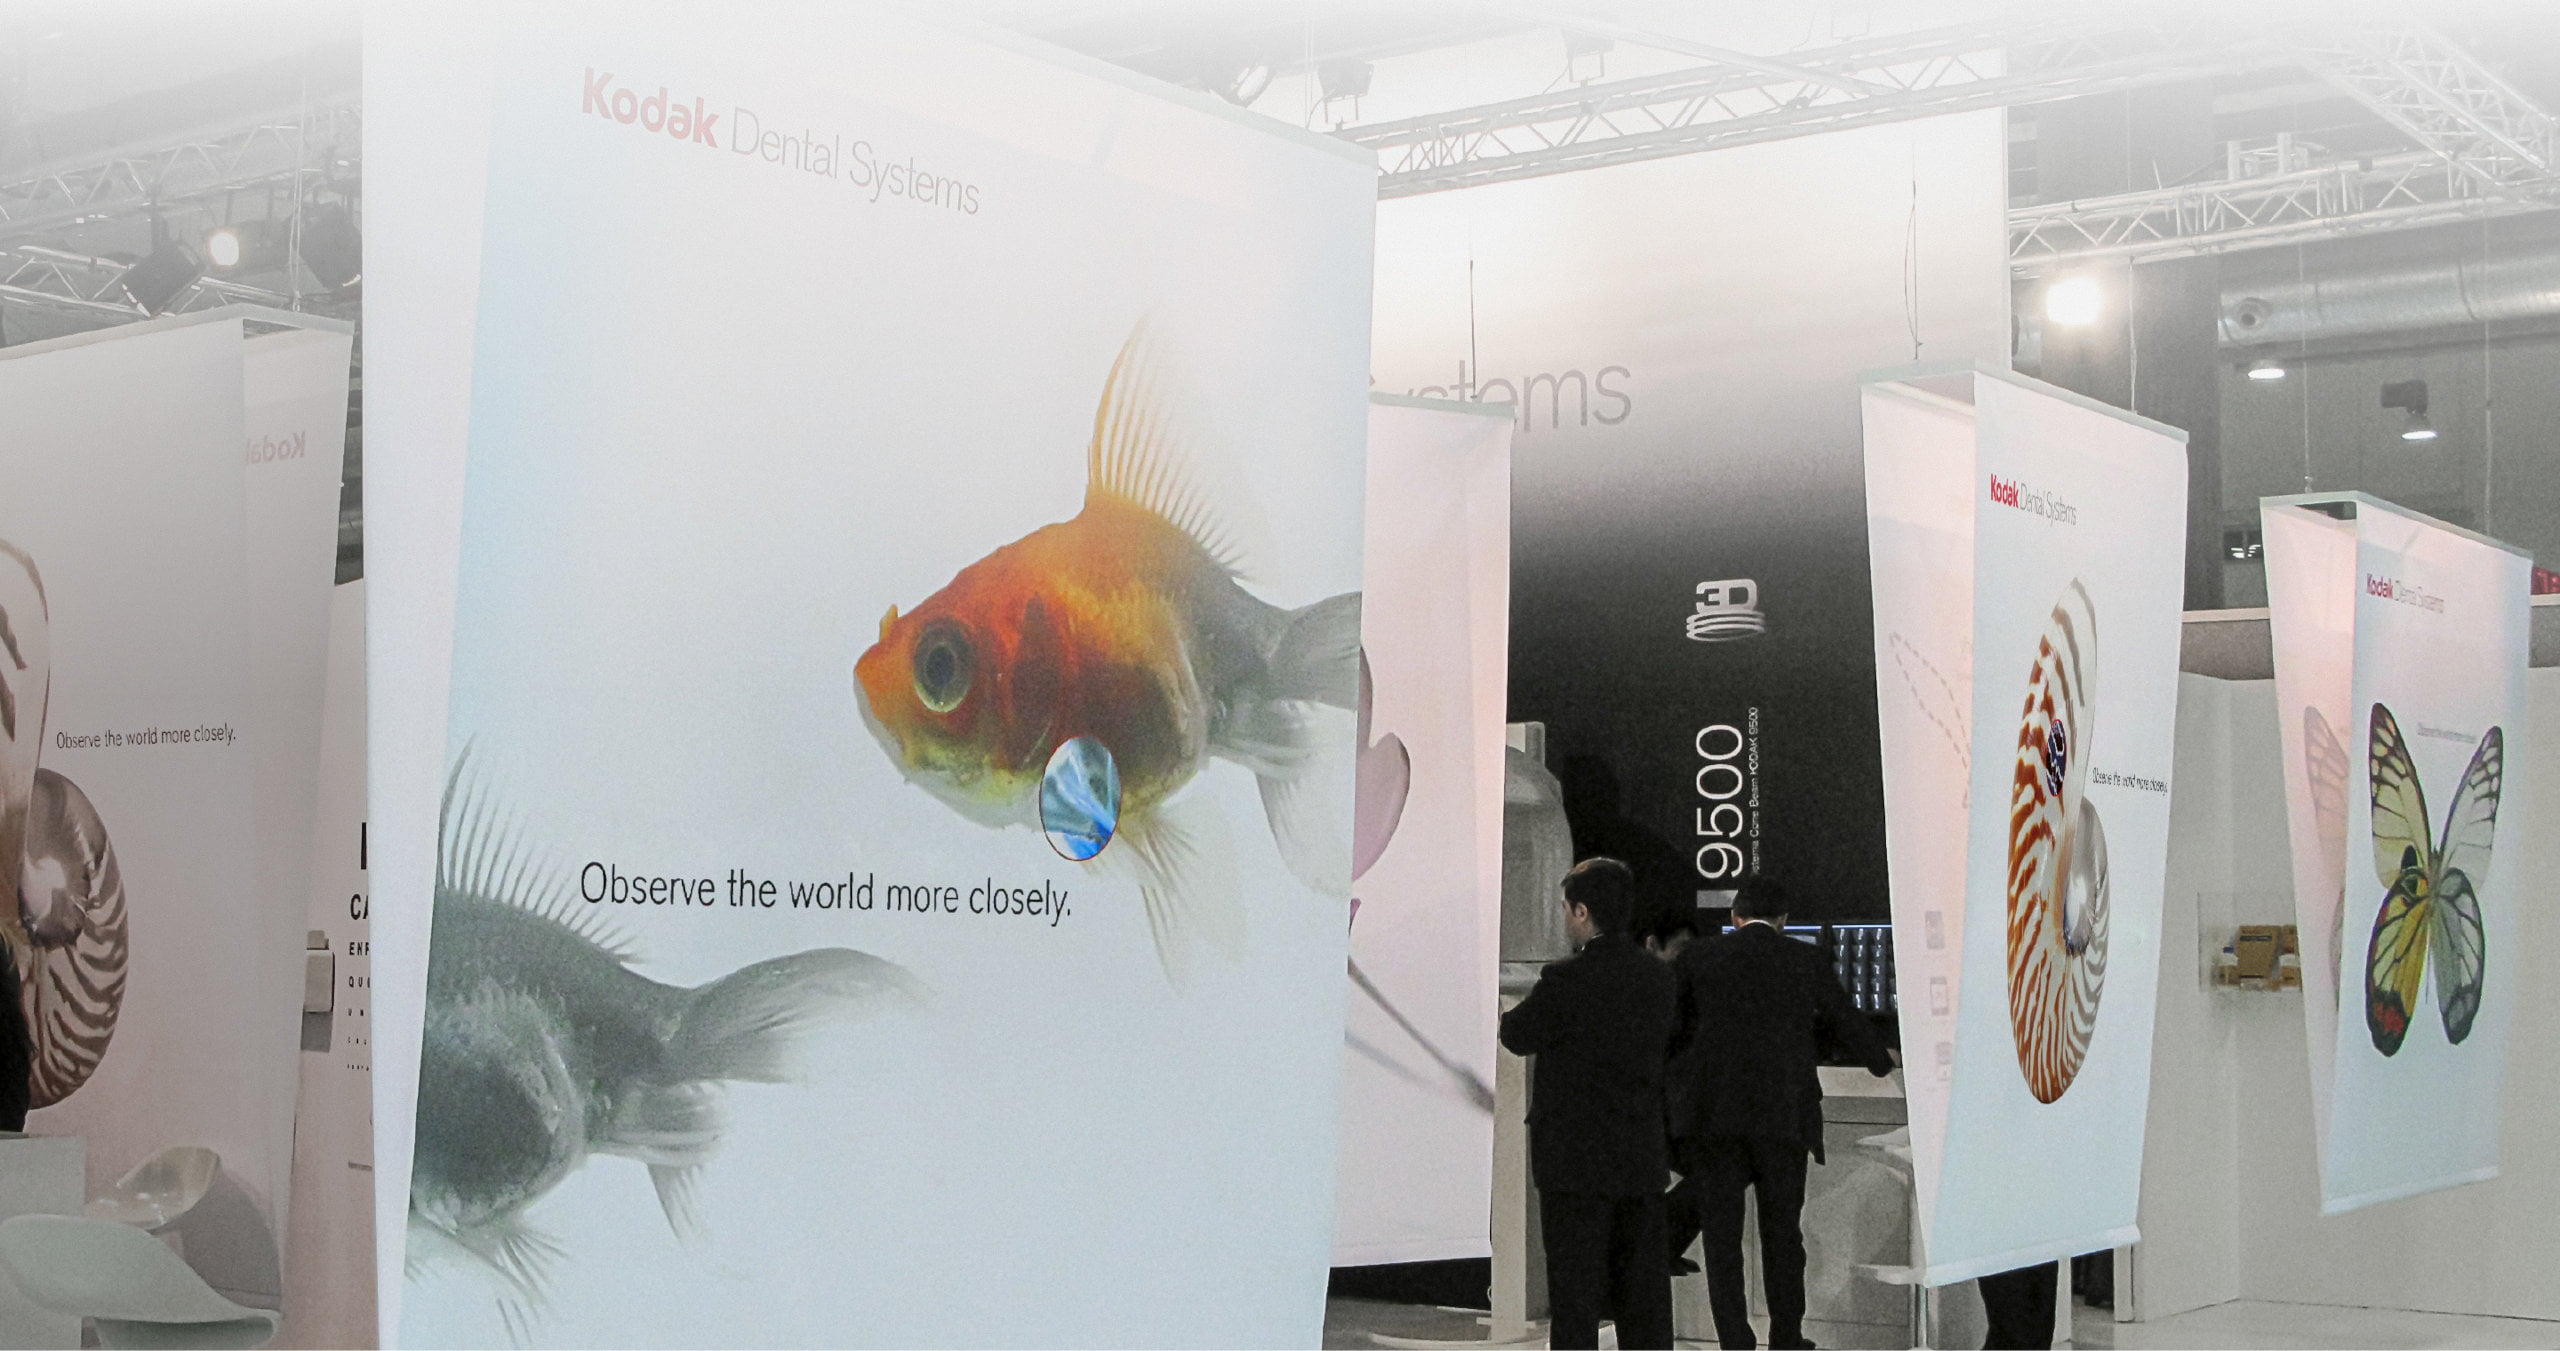 An innovative exhibit design for the launch of the new Kodak Dental Systems intraoral camera